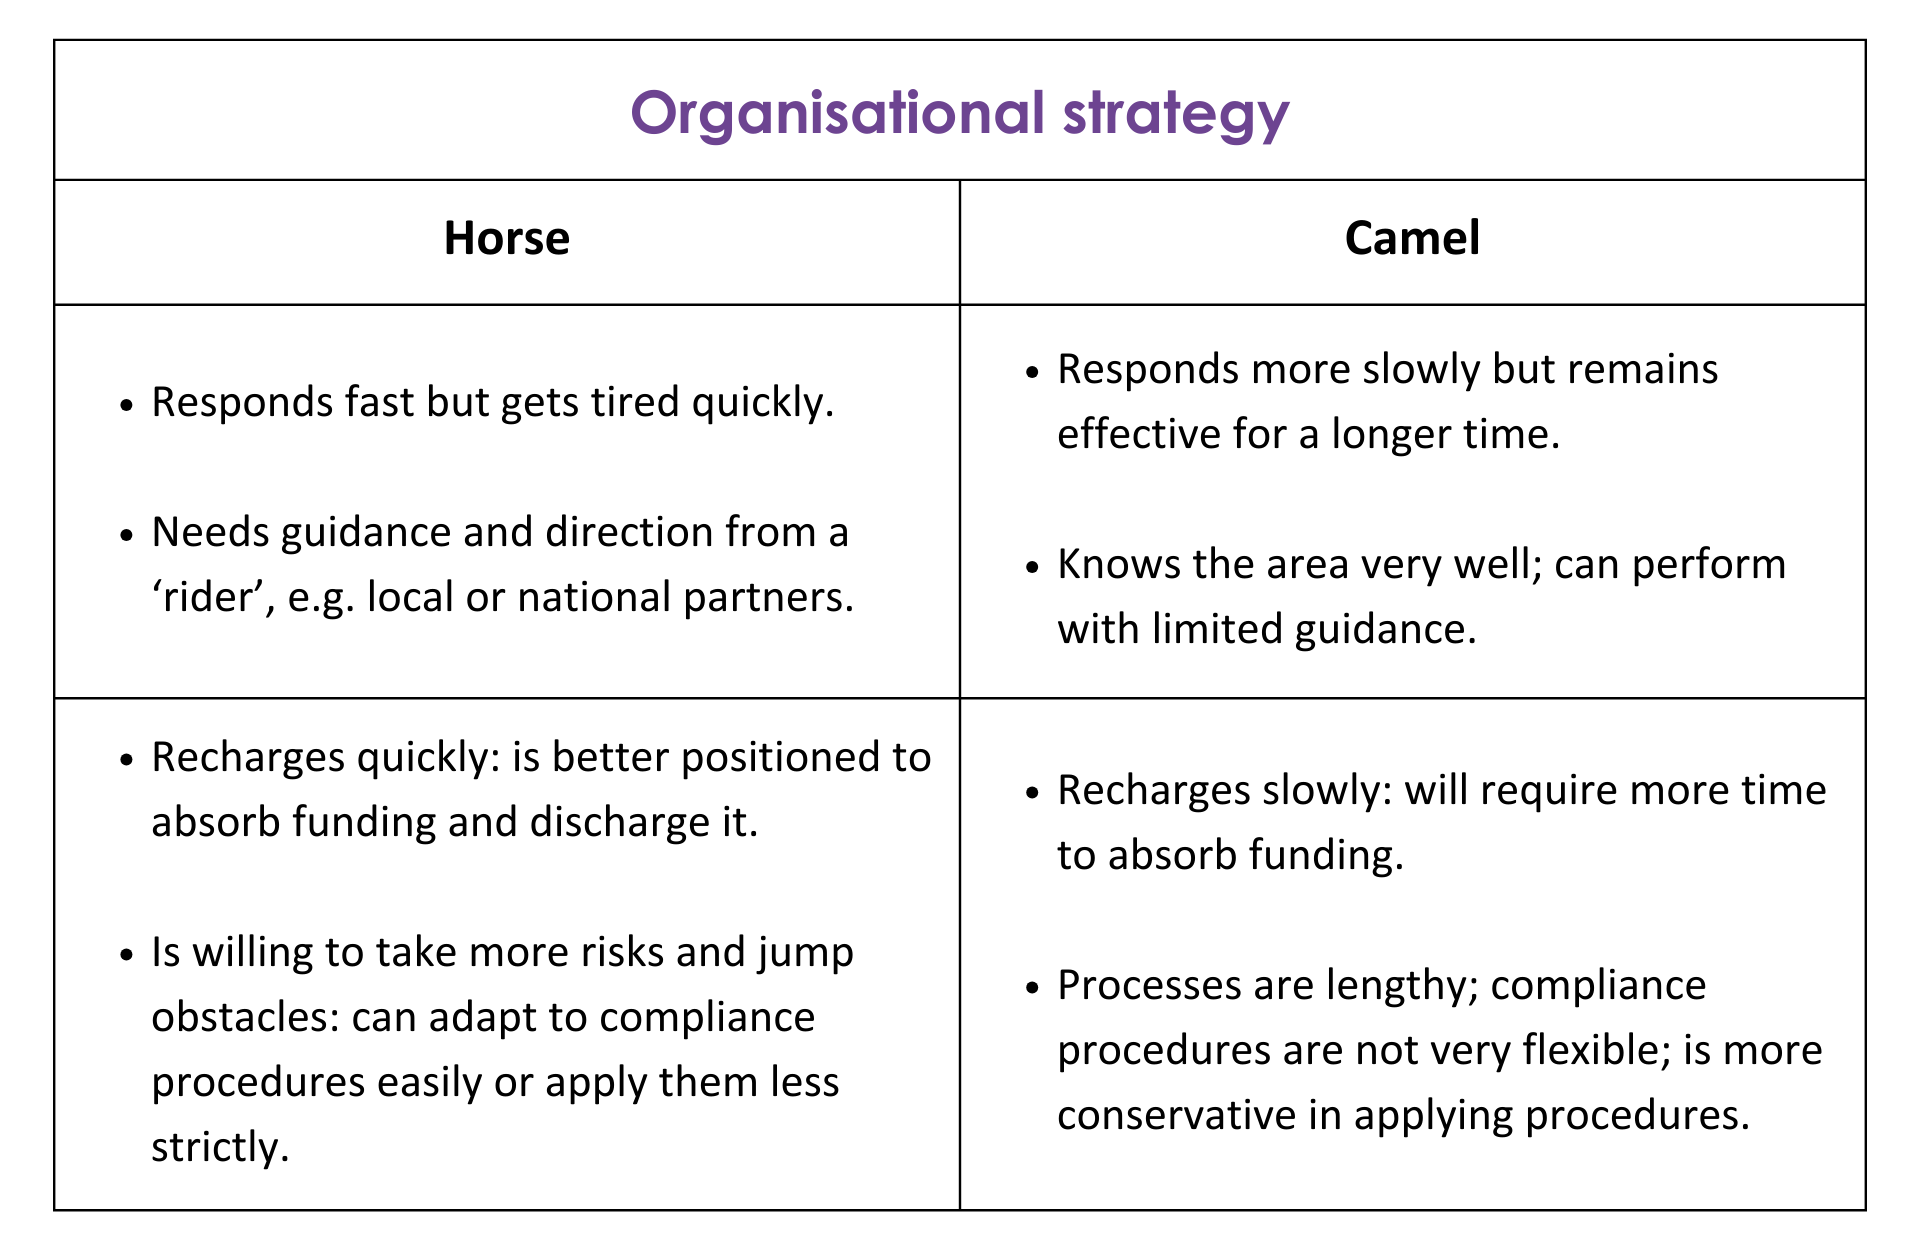 There are two types of organisational strategies that can be adopted following a disaster: the ‘horse’ and the ‘camel’. Which one is the most suitable for you and your organisation?